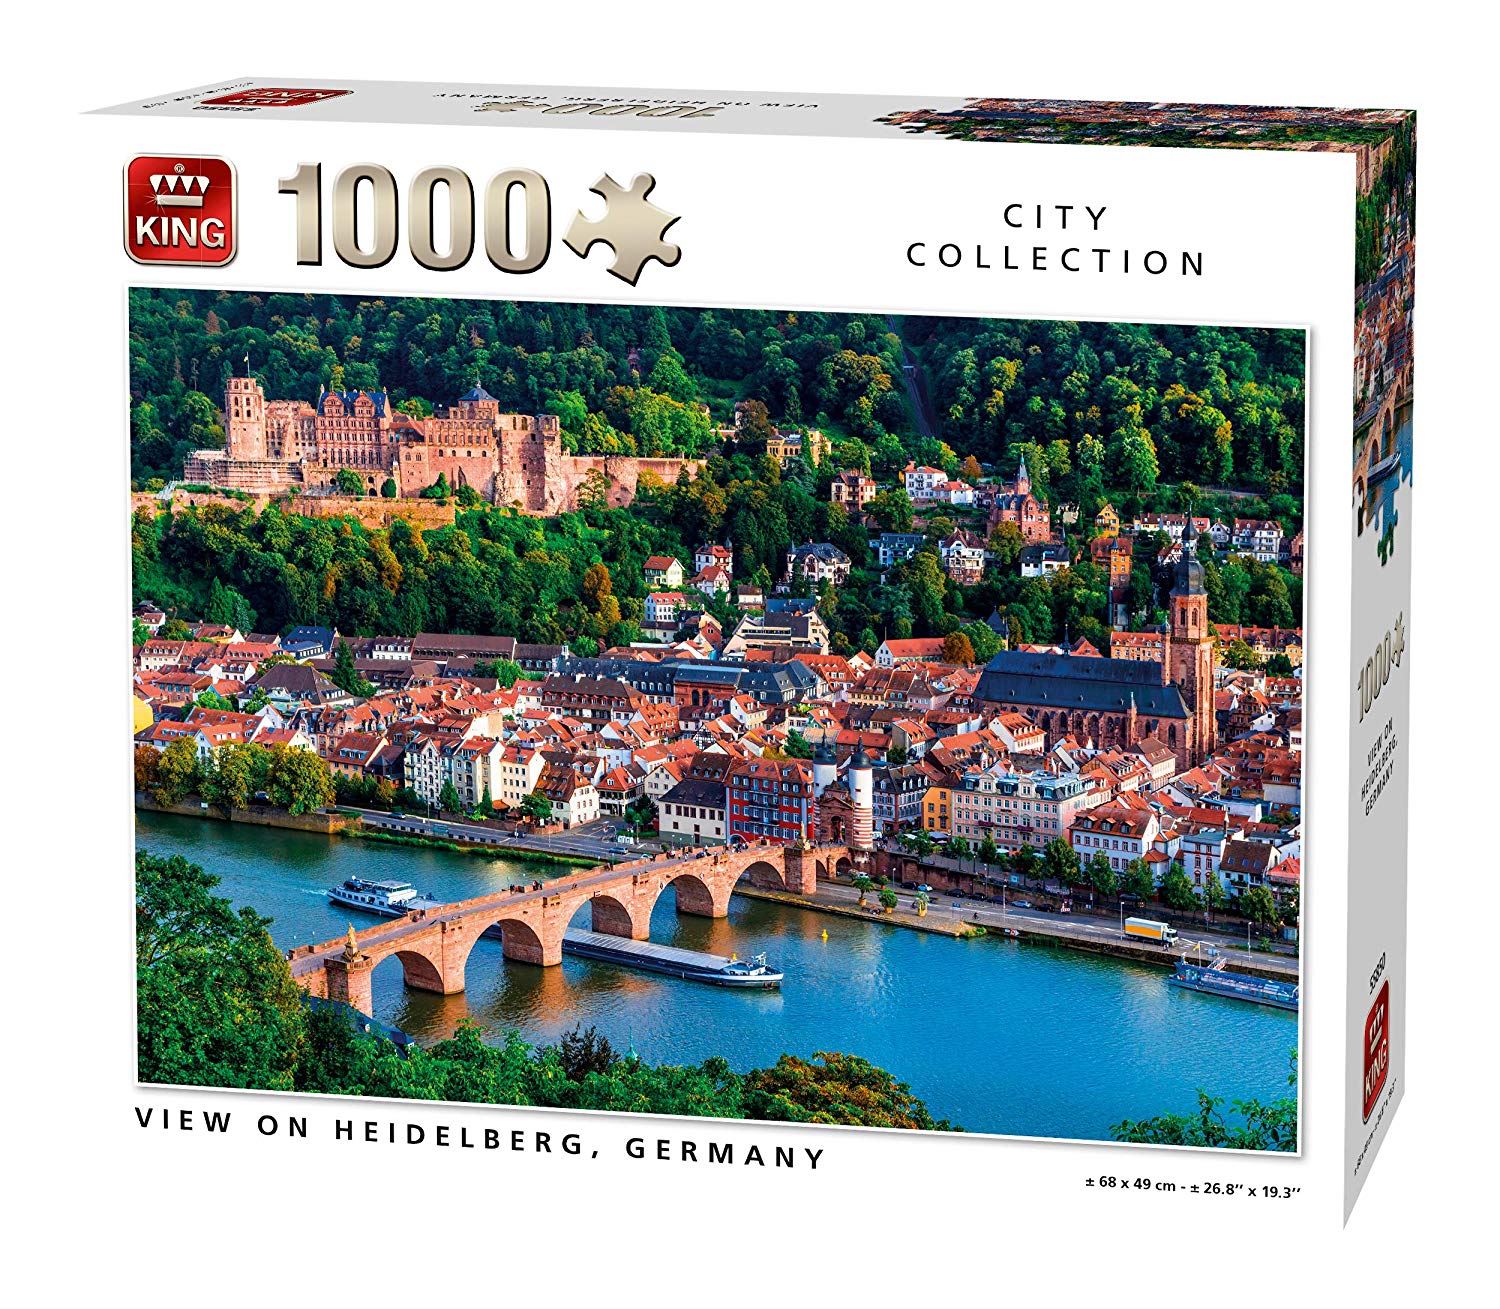 King 55850 Jigsaw Puzzle View of Heidelberg 68 x 49 cm 1000 Pieces Full Col